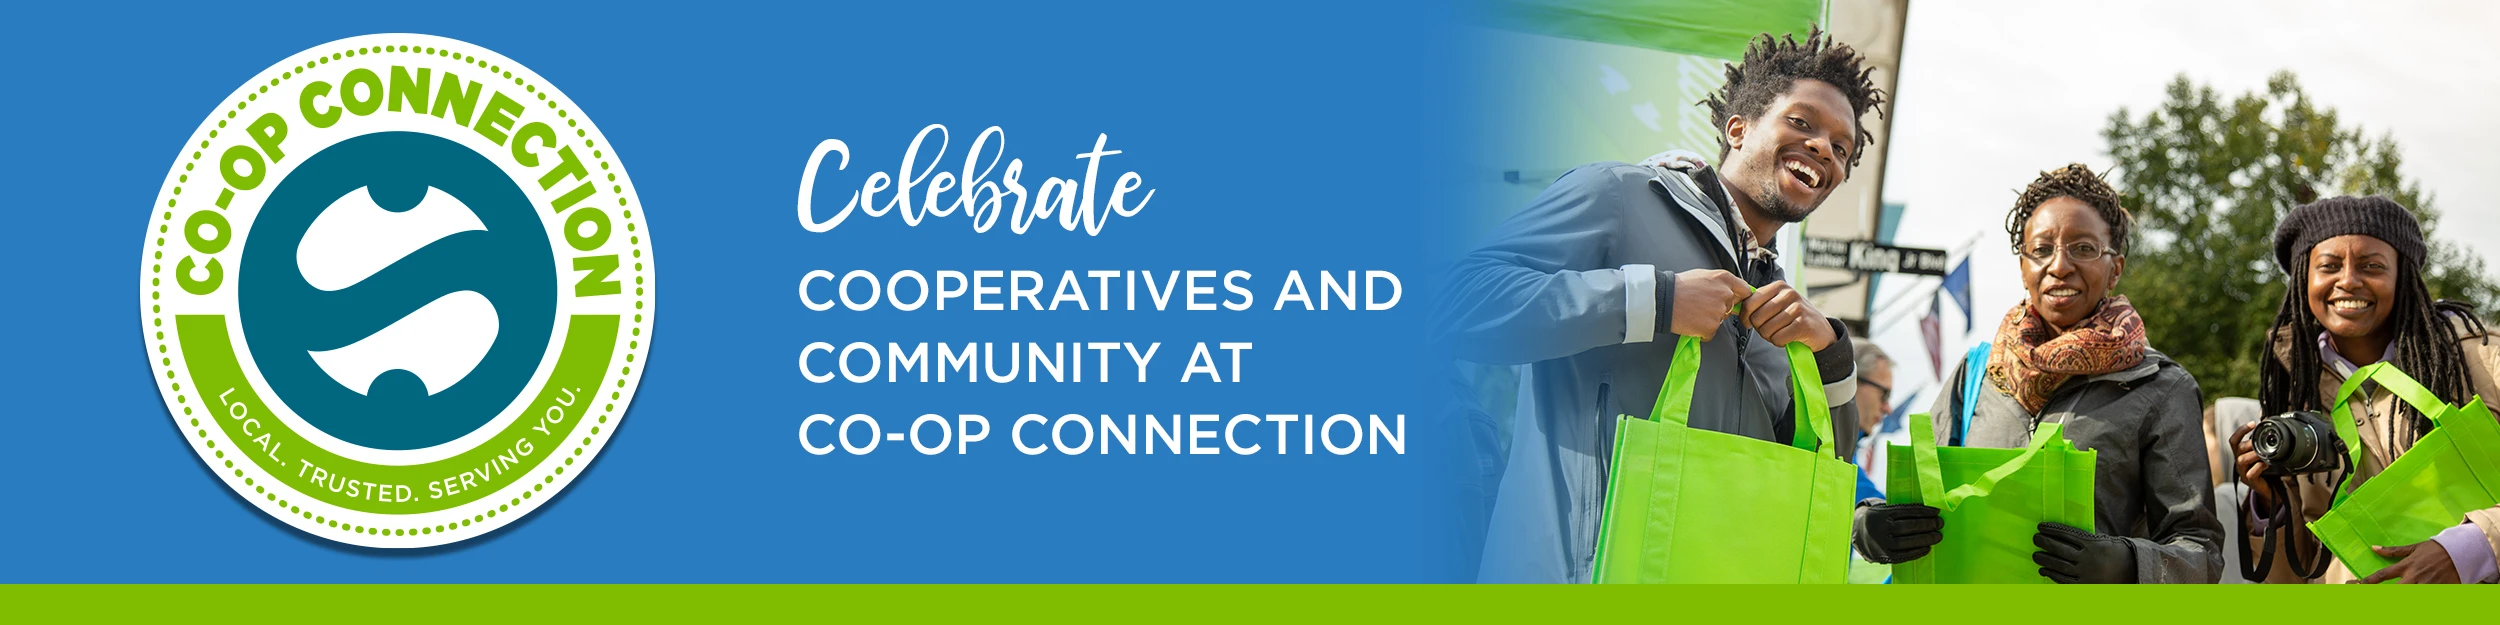 Celebrate Cooperatives and Community at Co-Op Connection 